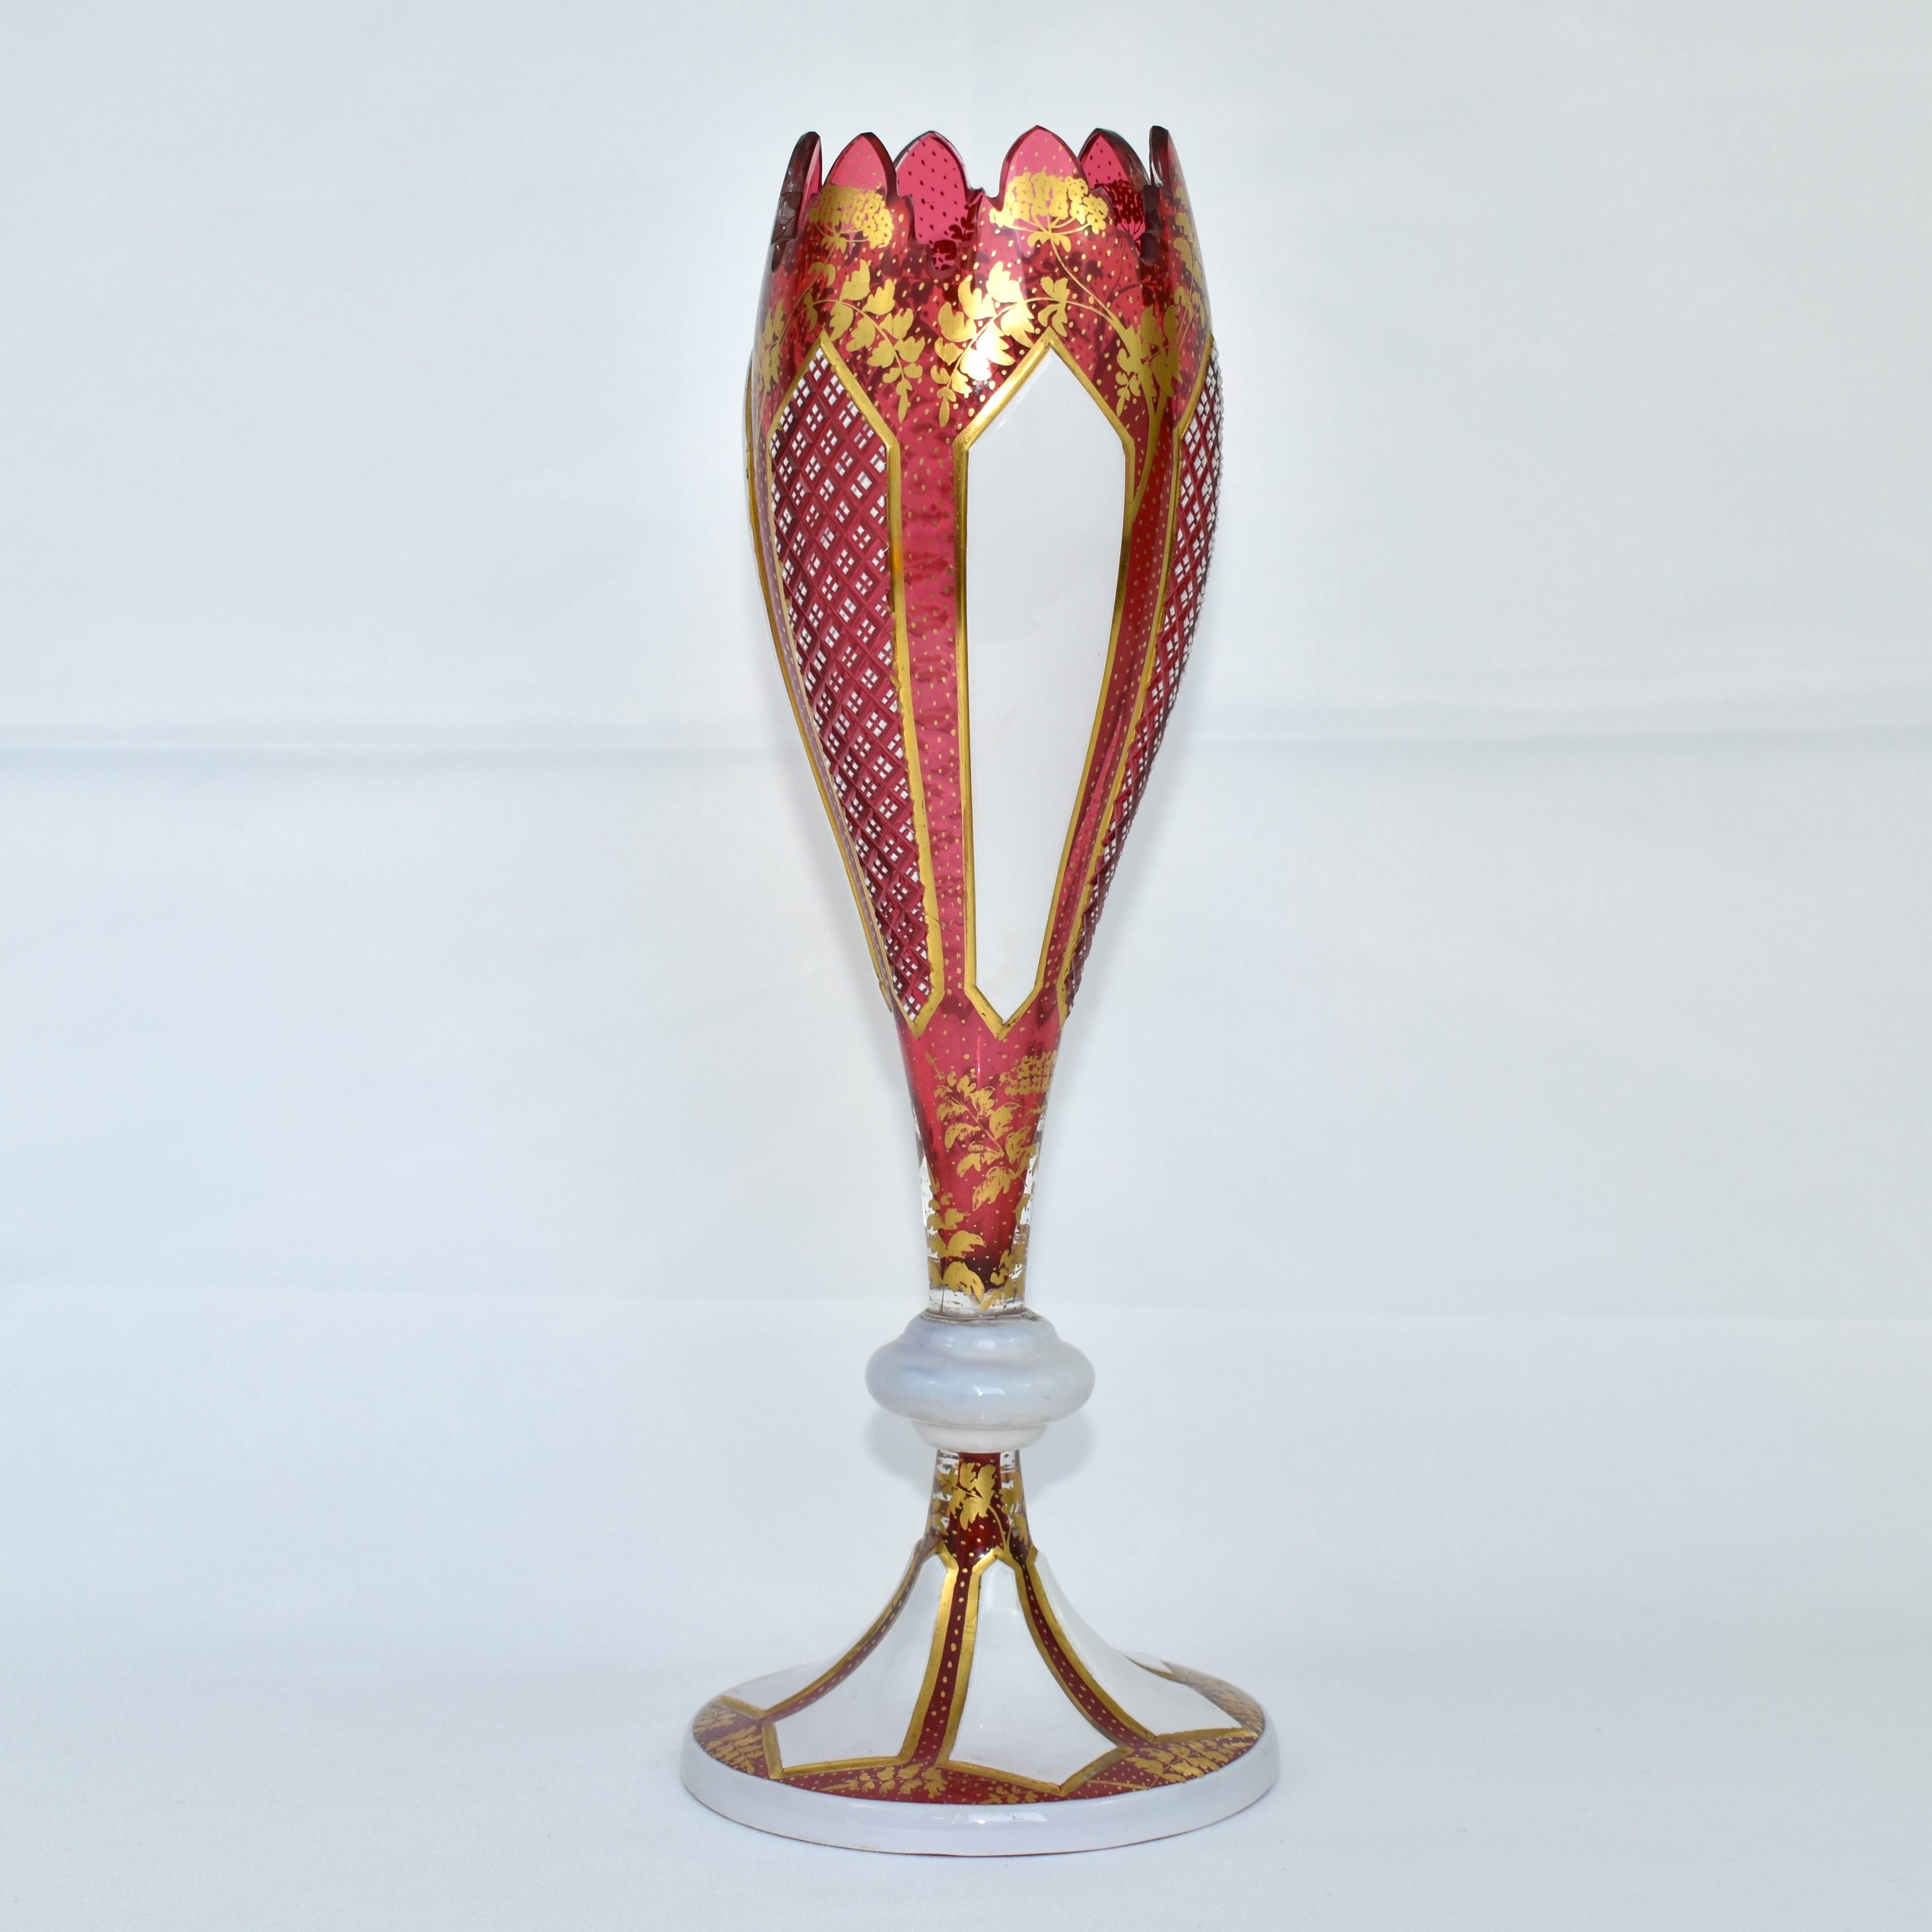 Exquisite Glass Vase, White Over Red

Clear Cranberry Crystal Overlaid with Opaline Glass

Stunning Cut Gilded Rim

Rich and Fine Gilding Decoration all around

Bohemia, circa 1860.